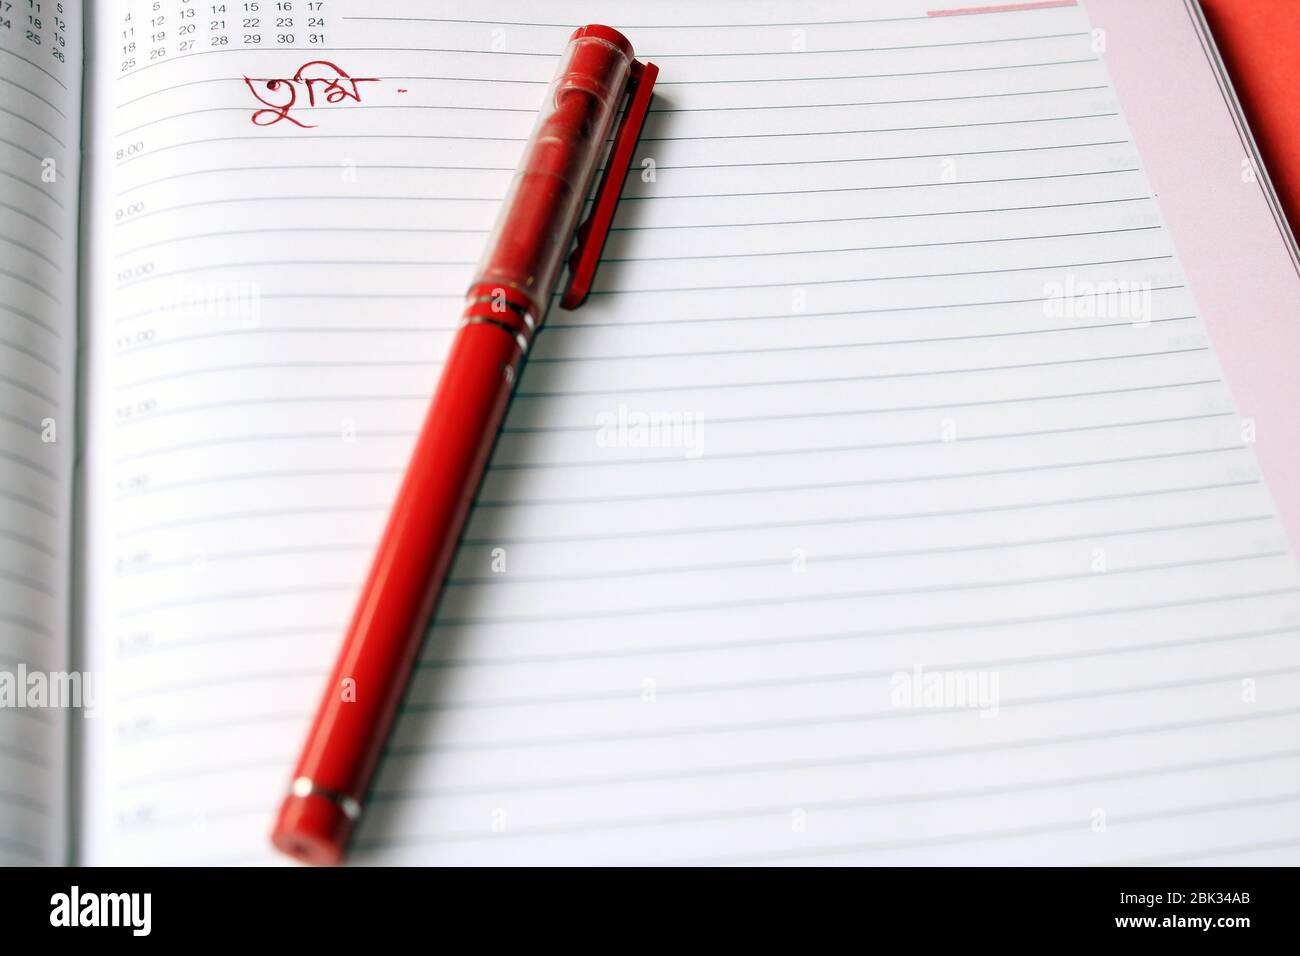 Pen on open notebook. Open diary page. Love letter concept. Stock Photo